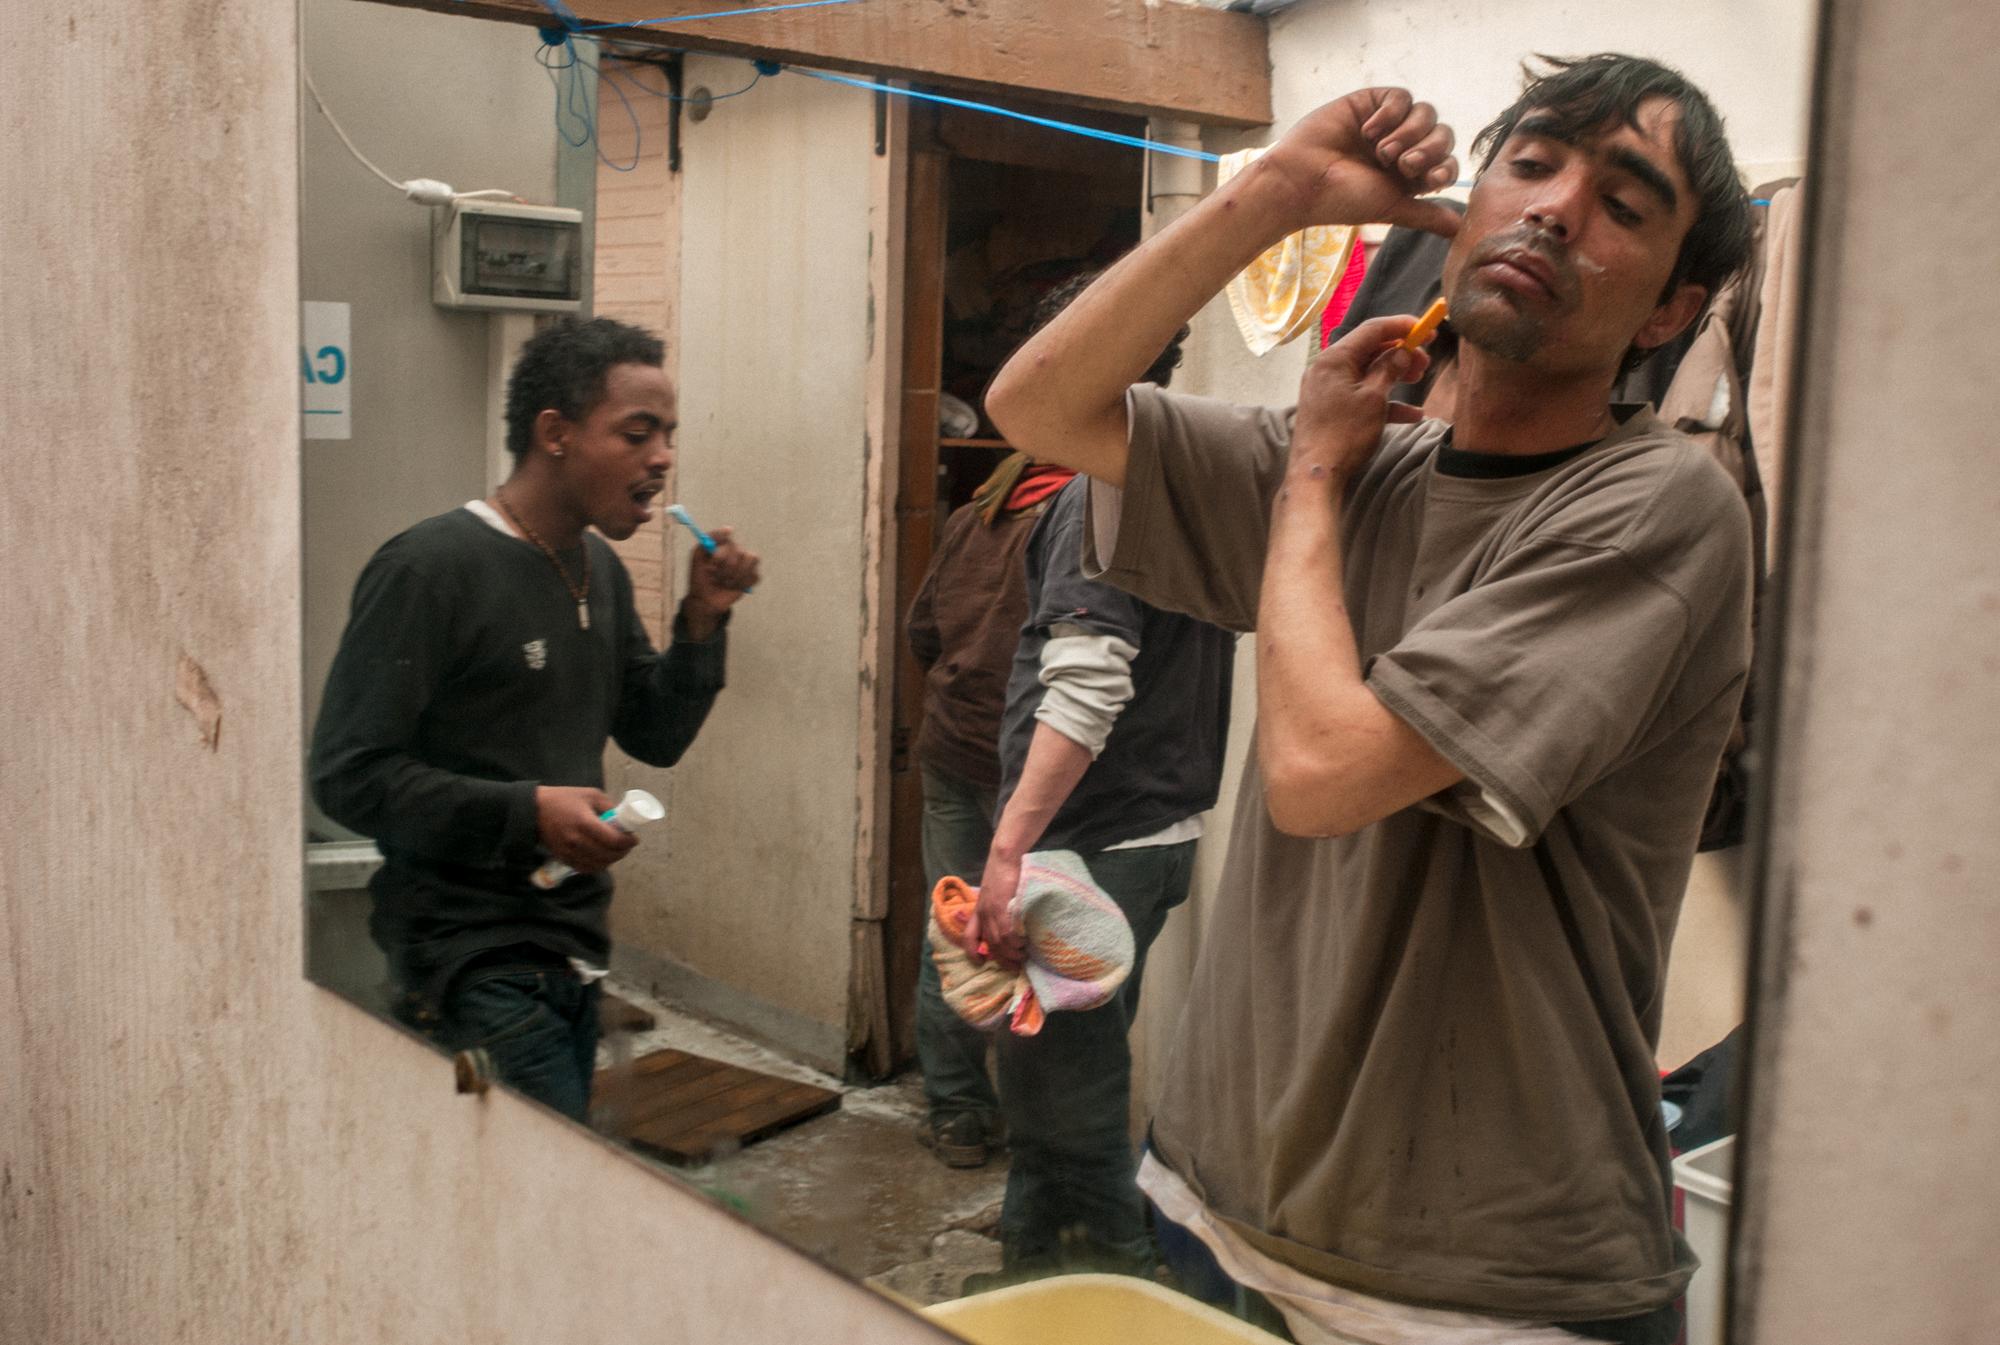 Iranian and Eritrean immigrants at Secours Catholiques which provides daily shower facilities....